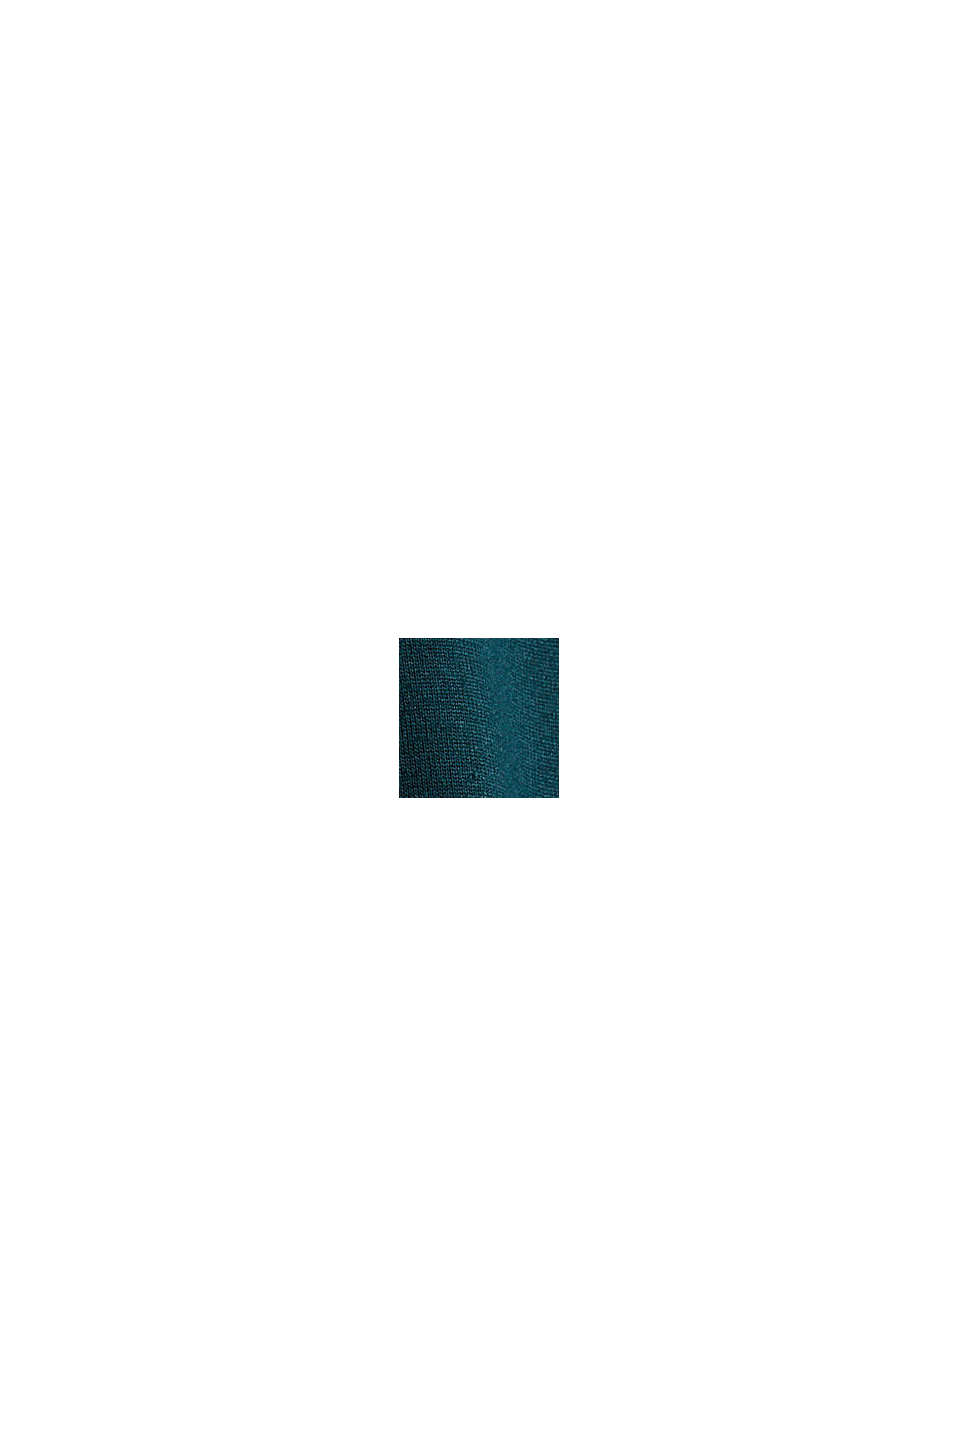 Abito in jersey con ruches, LENZING™ ECOVERO™, DARK TEAL GREEN, swatch